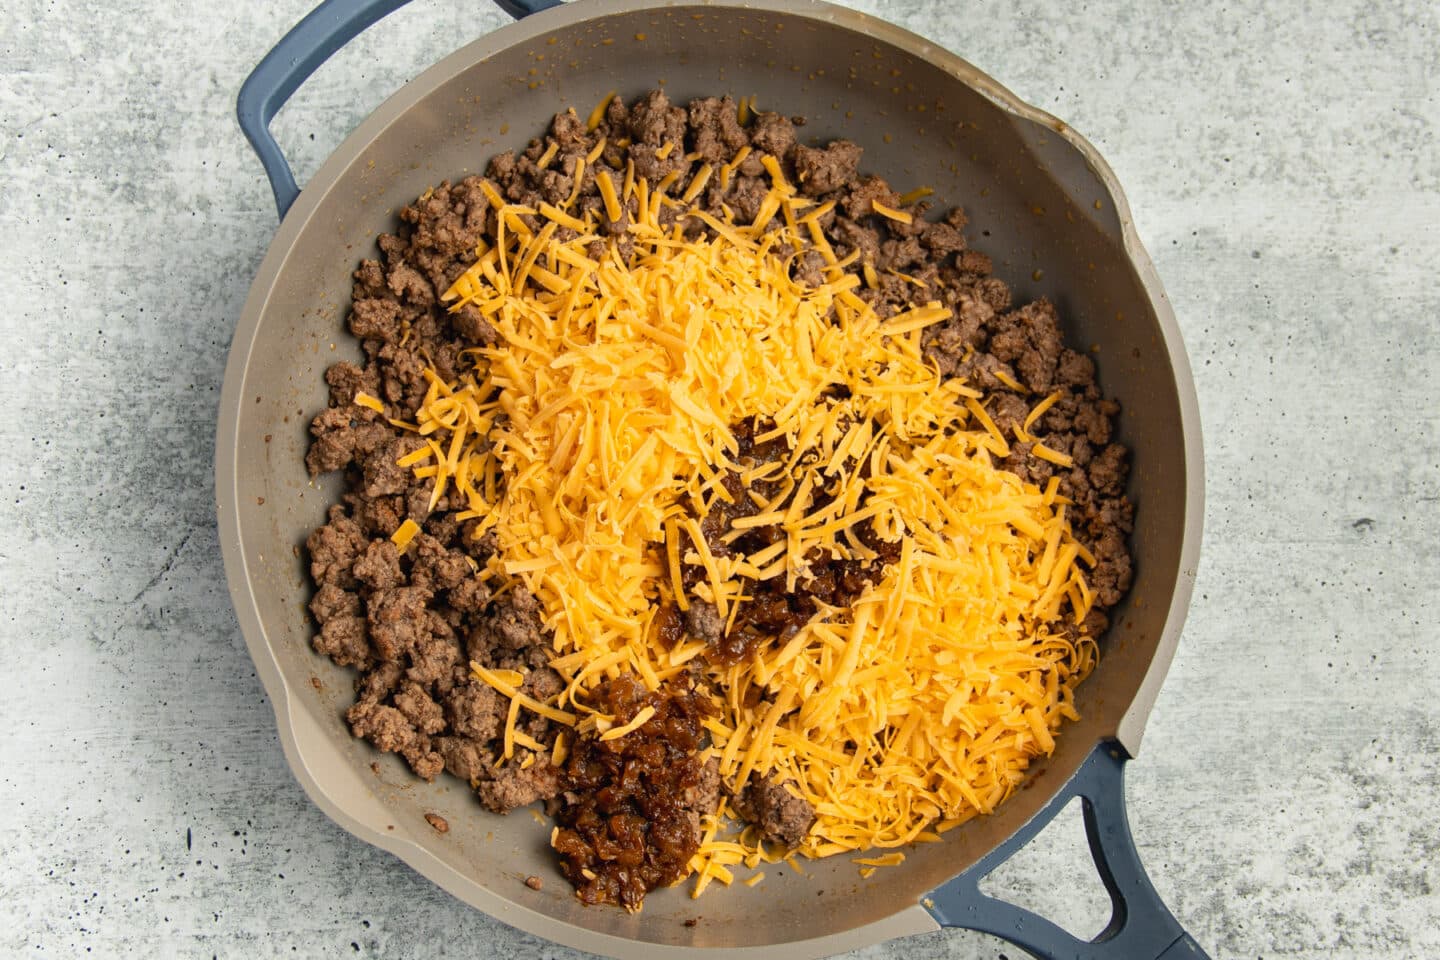 This is a picture of the skillet with ground beef, cheese and onions.